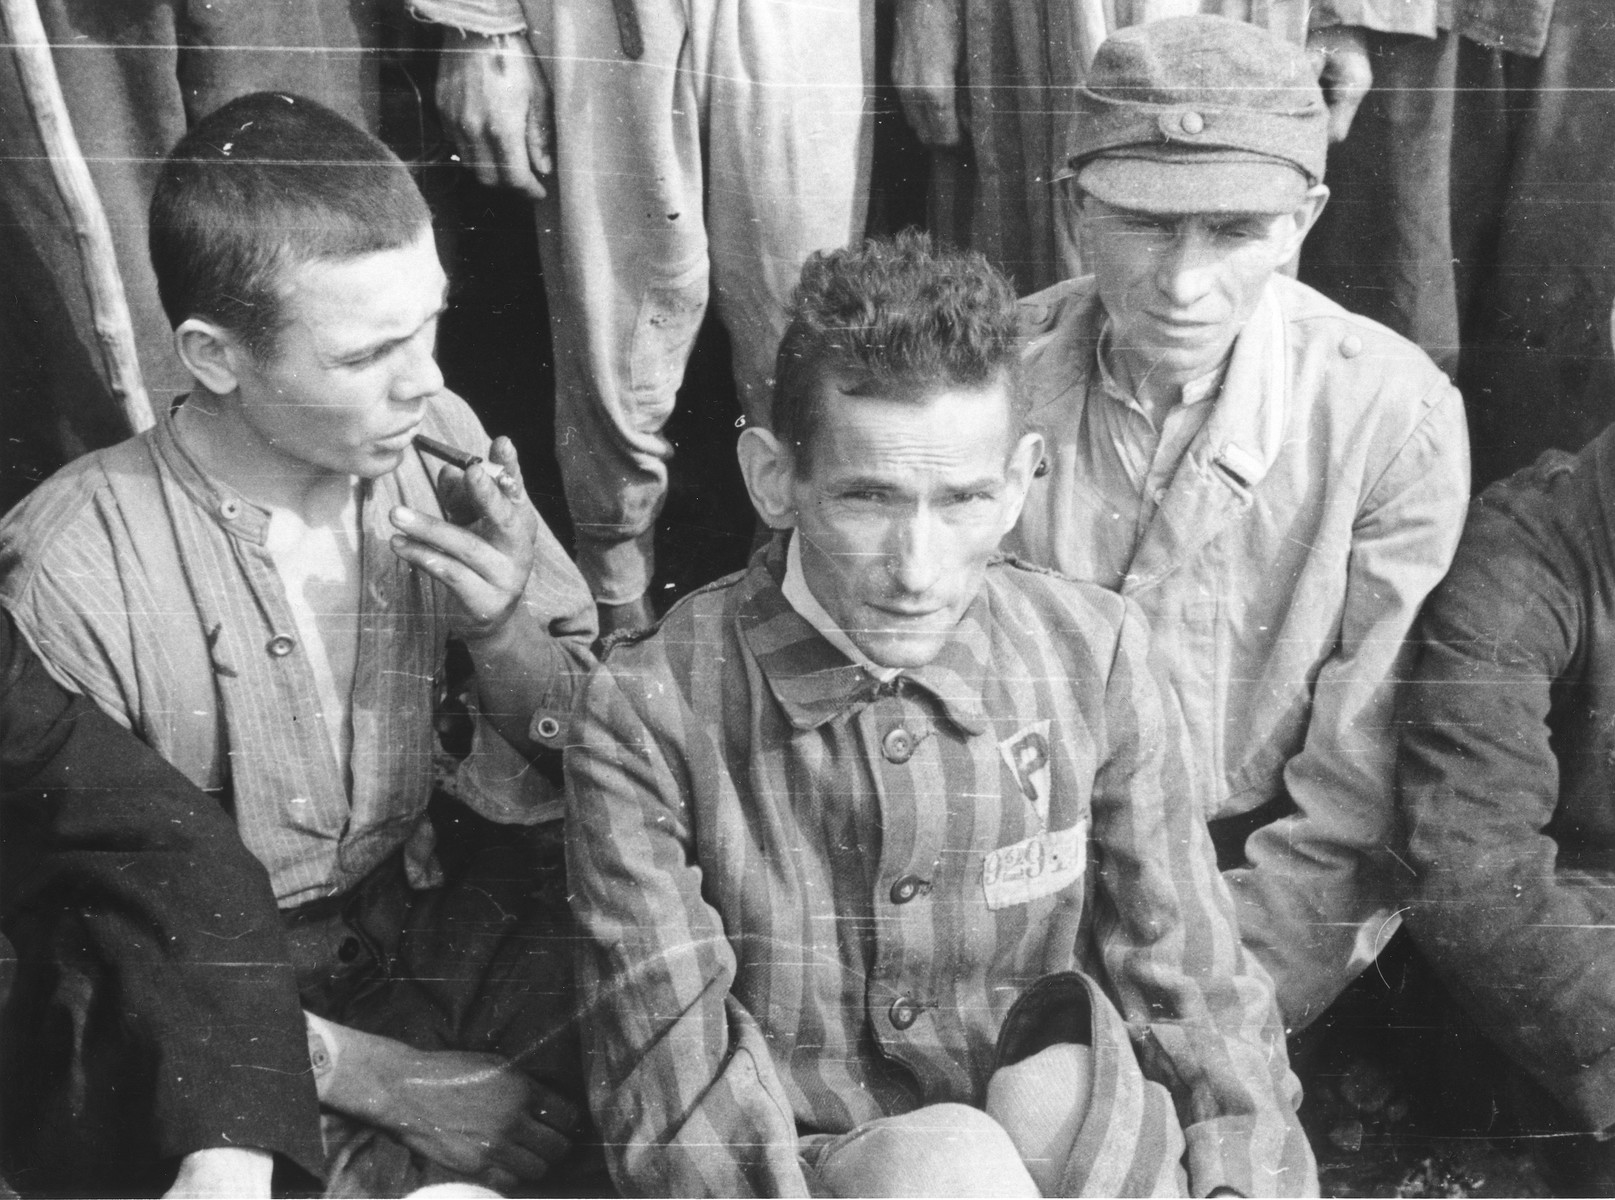 A close-up of three survivors at a gathering in the Langenstein-Zwieberge concentration camp, a sub-camp of Buchenwald, soon after liberation.

The man on the right has been identified as Robert Nardou. The man in the foreground wears a triangular badge with the letter P probably signifying that he was classified as a Polish political prisoner during his incarceration in the camp.